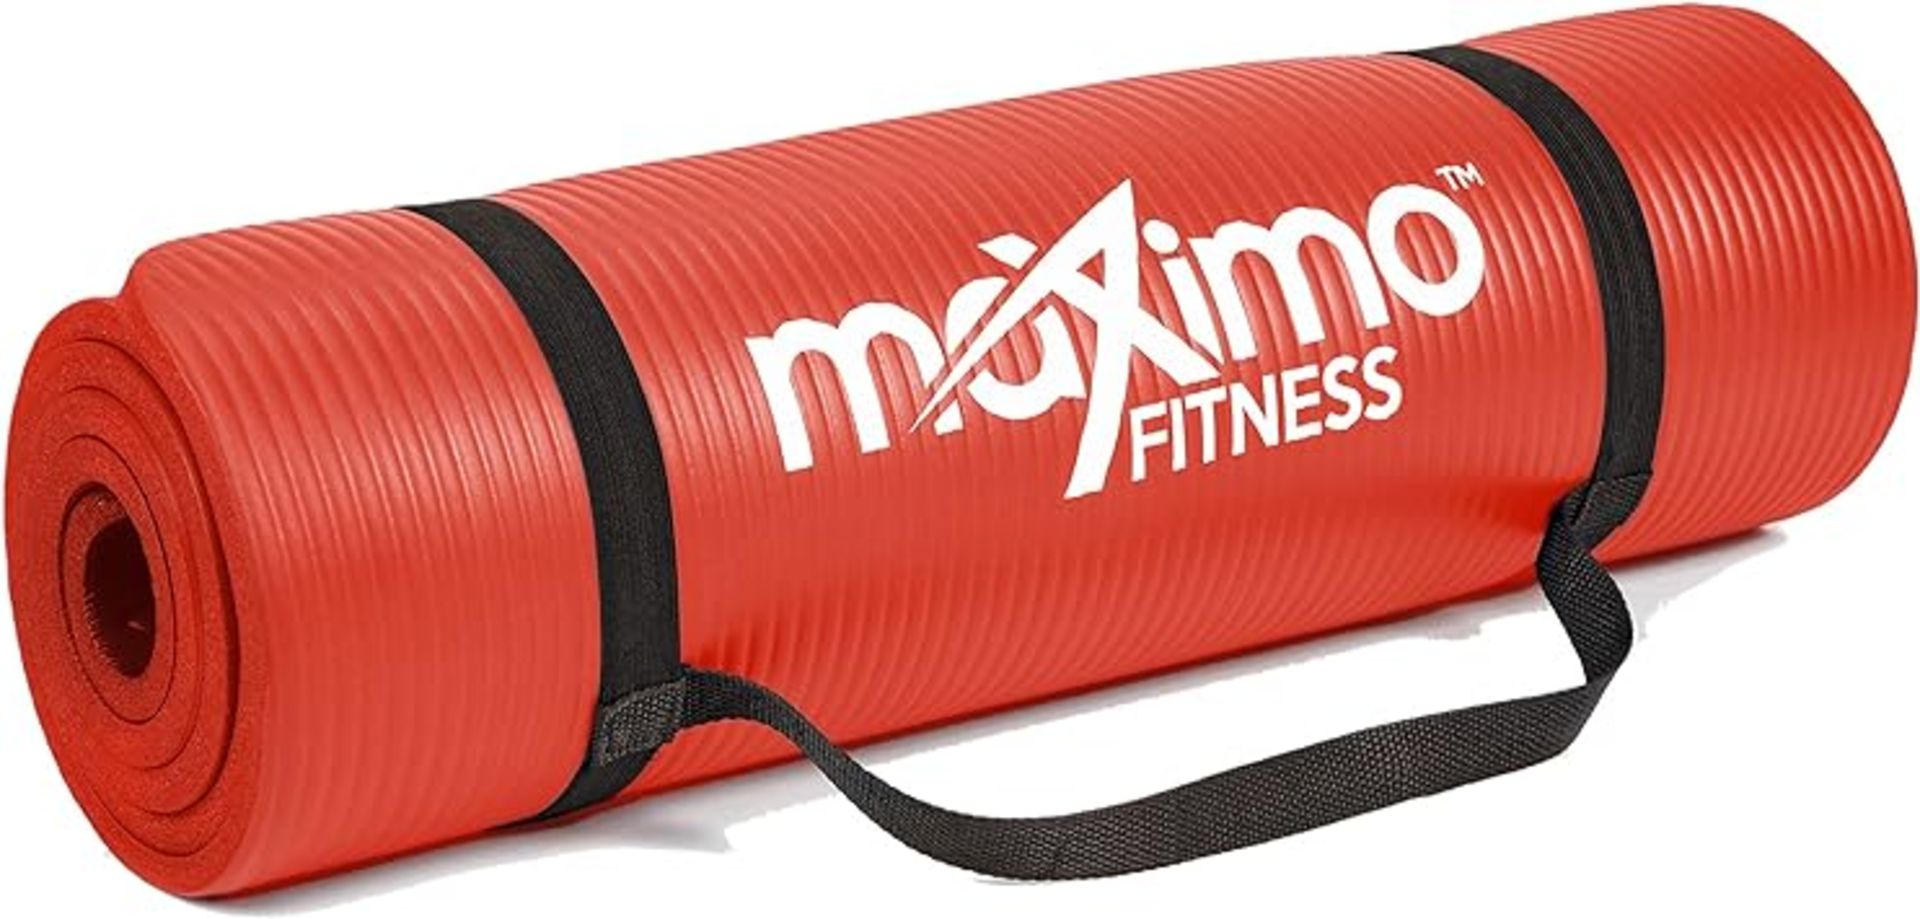 Pallet of Exercise Mats (Red) - Image 2 of 4